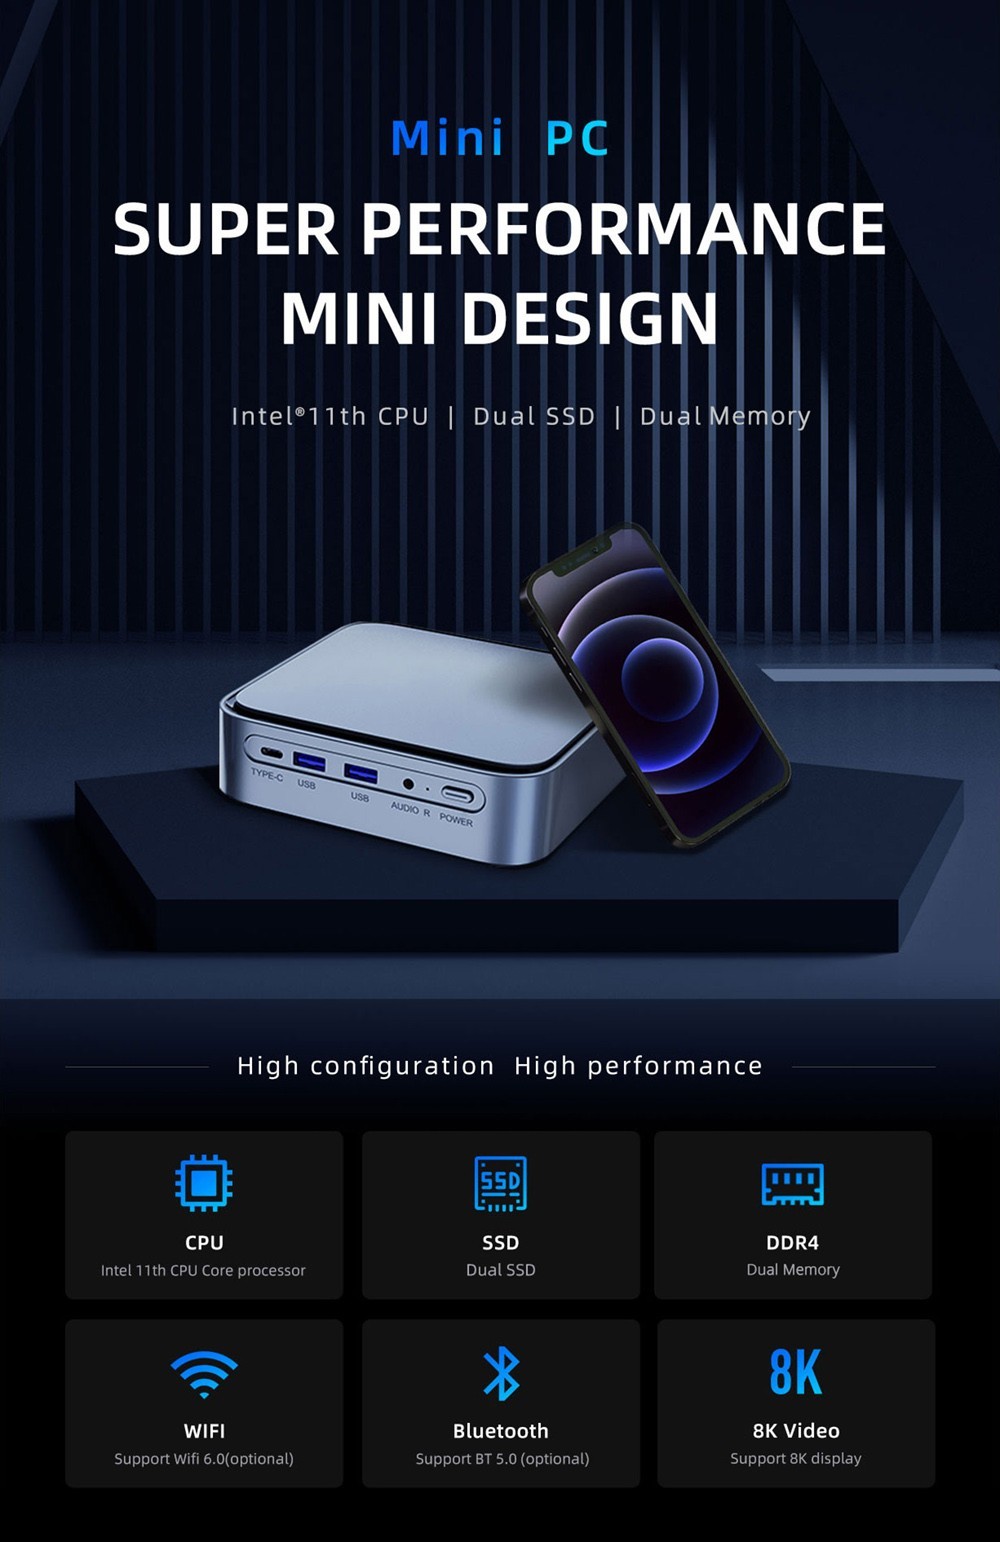 Get TK11-B0 Mini PC with a Discounted Price Using Coupon Code on GEEKBUYING